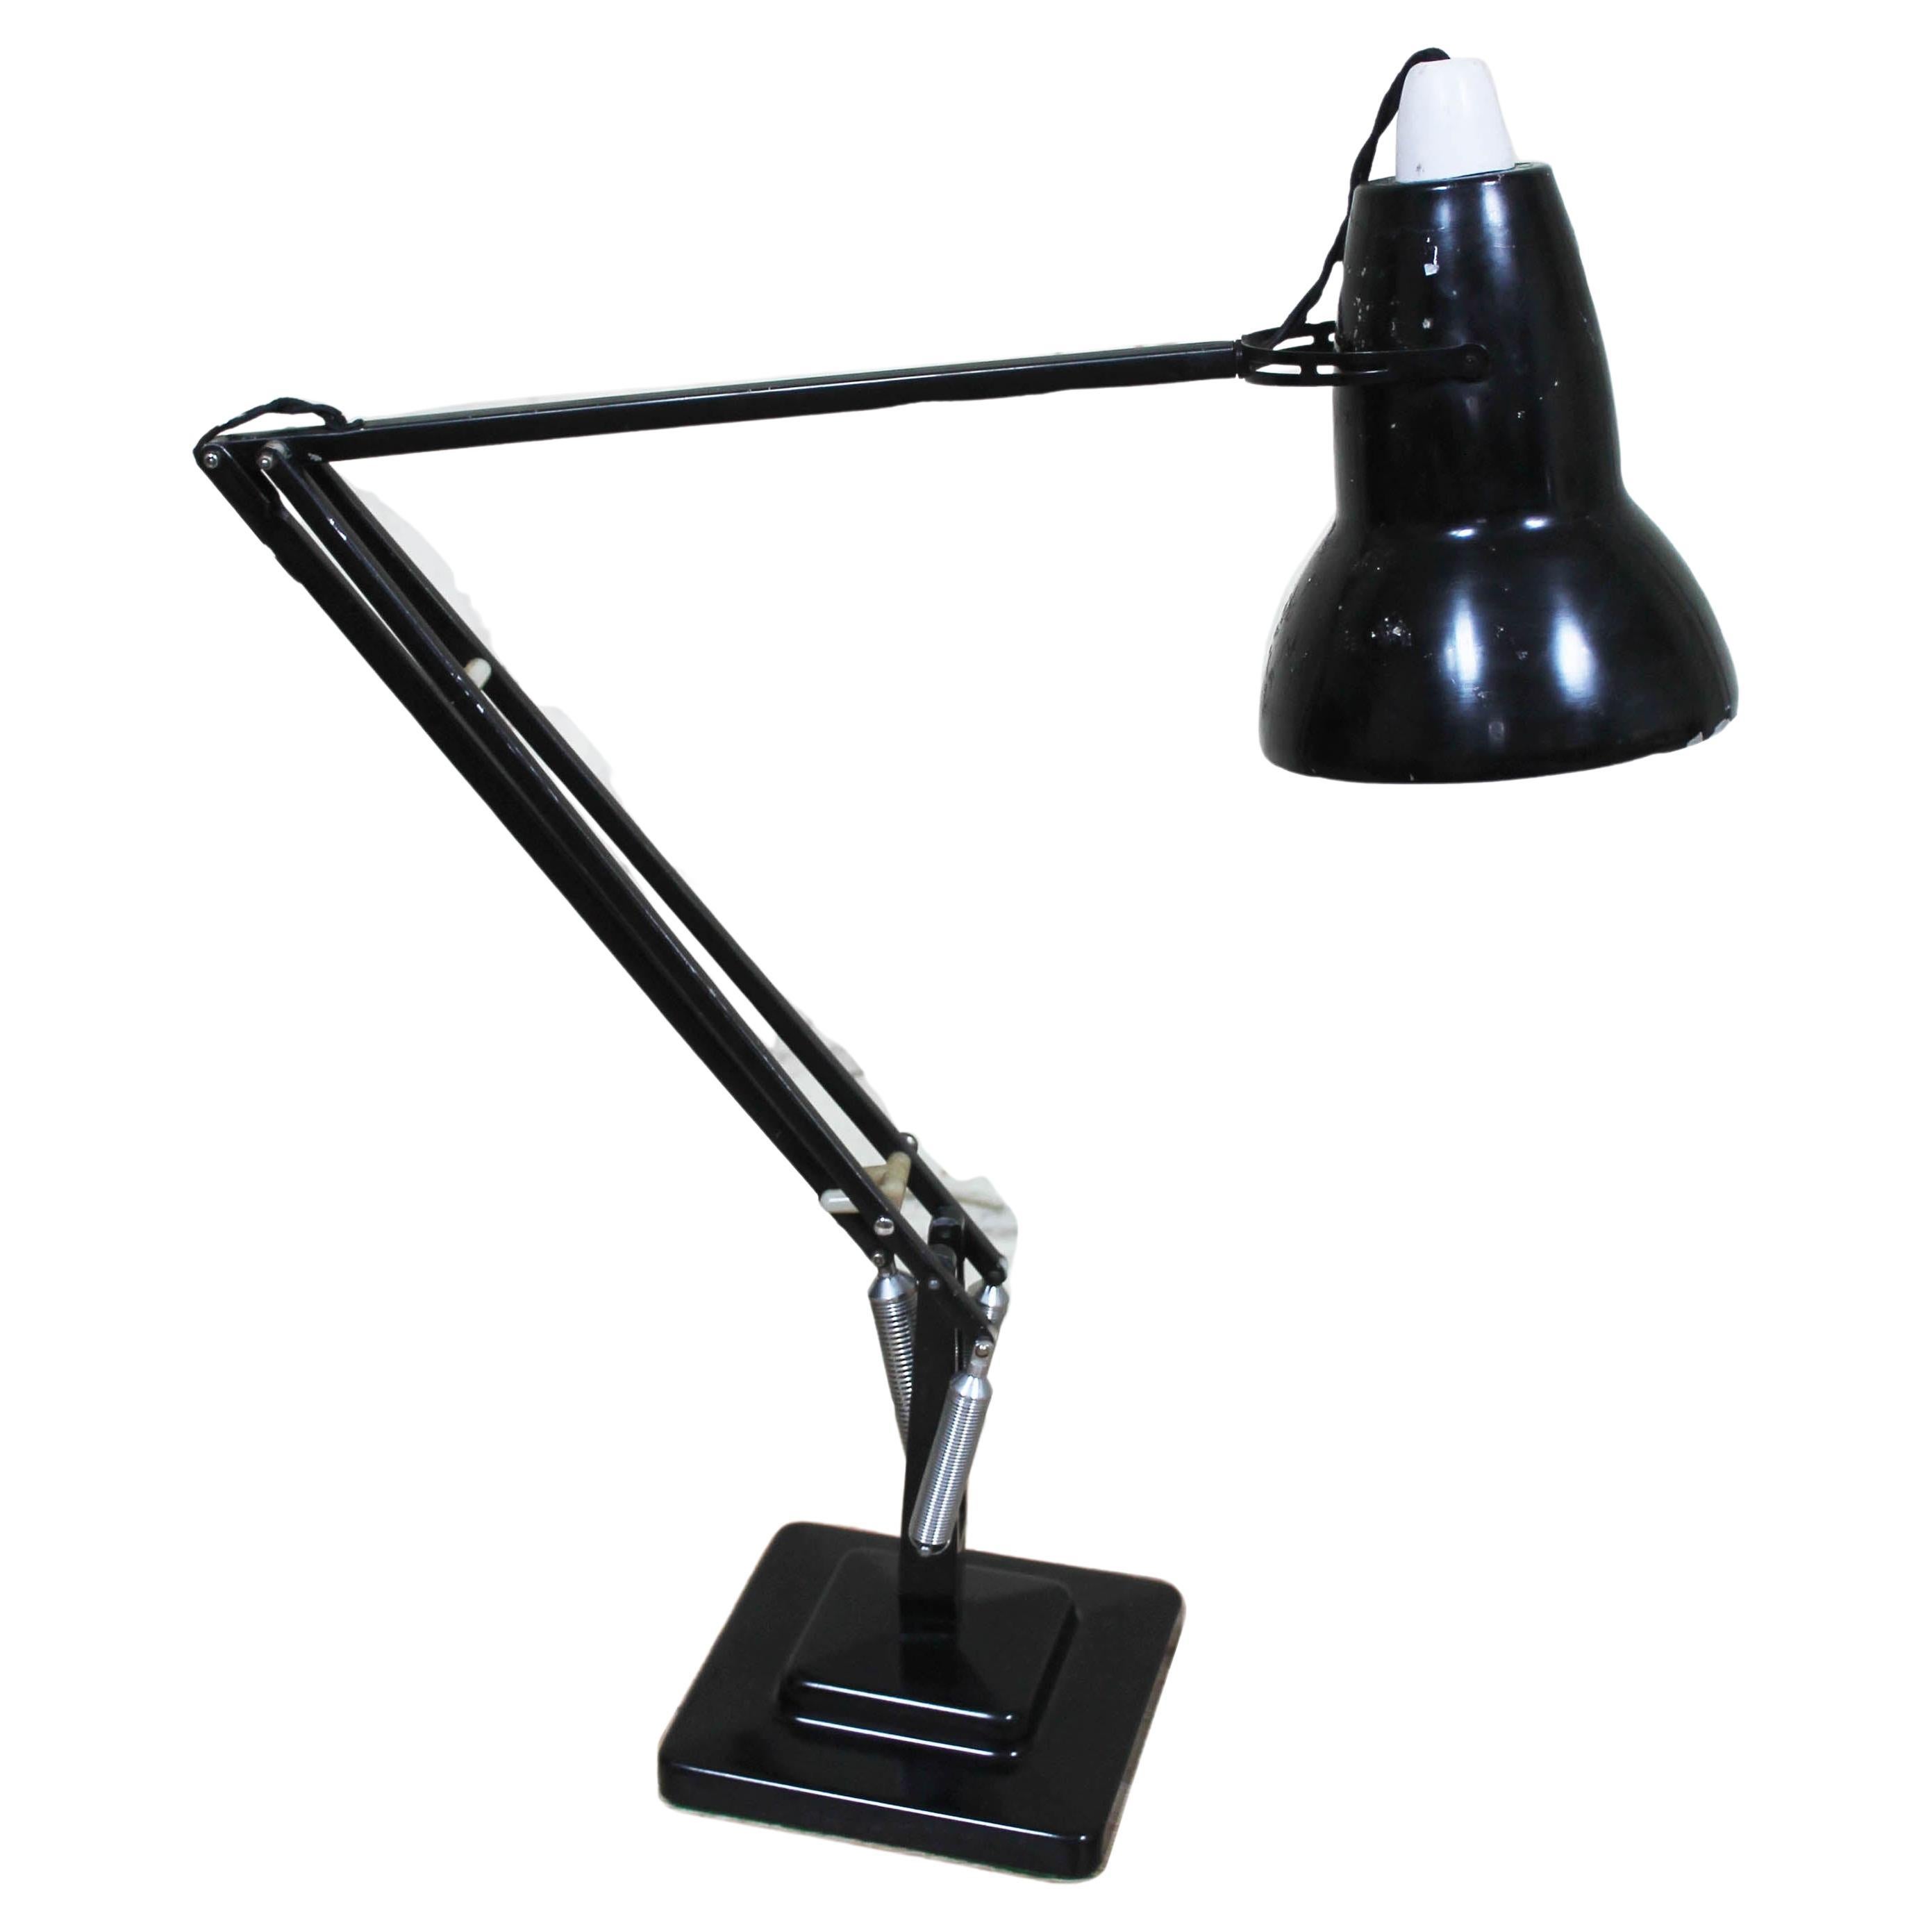 Herbert Terry Anglepoise Model 1227 Black Two Step Articulated Desk Lamp 1930's 